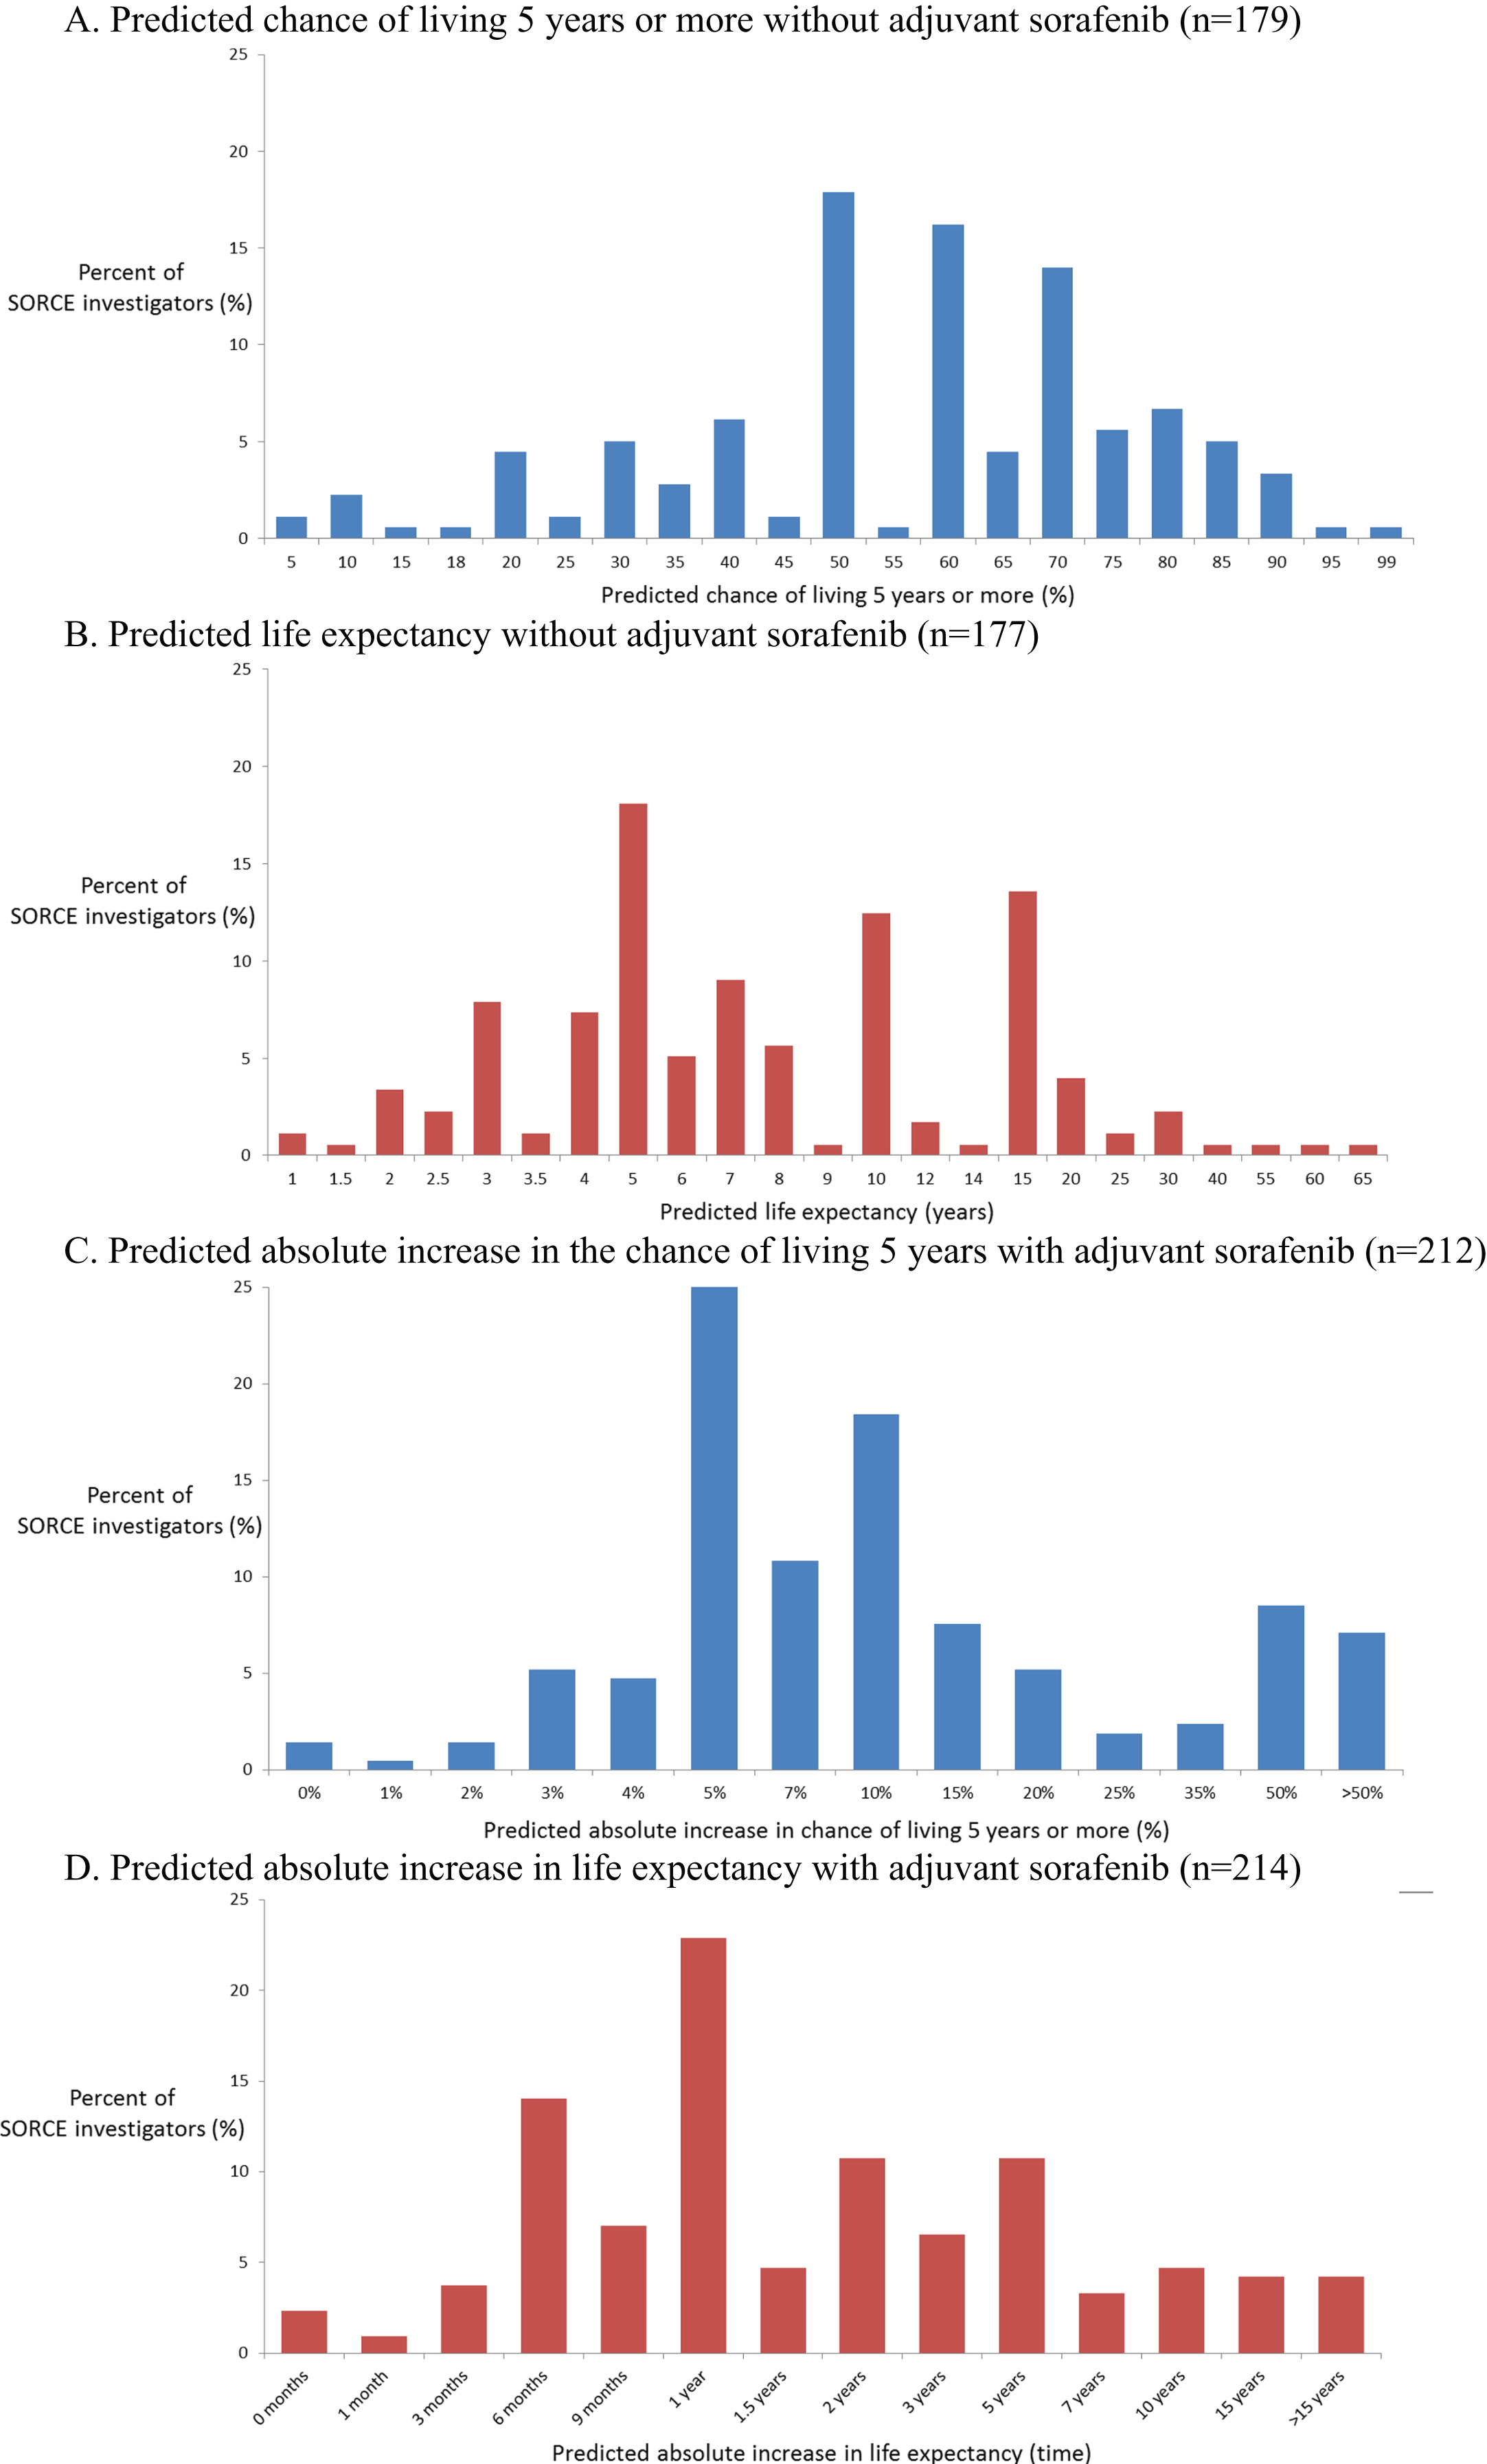 Distributions of medical oncologists’ predicted survival rates and survival times without adjuvant sorafenib, and predicted improvements with adjuvant sorafenib. A. Predicted chance of living 5 years or more without adjuvant sorafenib (n = 179). B. Predicted life expectancy without adjuvant sorafenib (n = 177). C. Predicted absolute increase in the chance of living 5 years with adjuvant sorafenib (n = 212). D. Predicted absolute increase in life expectancy with adjuvant sorafenib (n = 214).